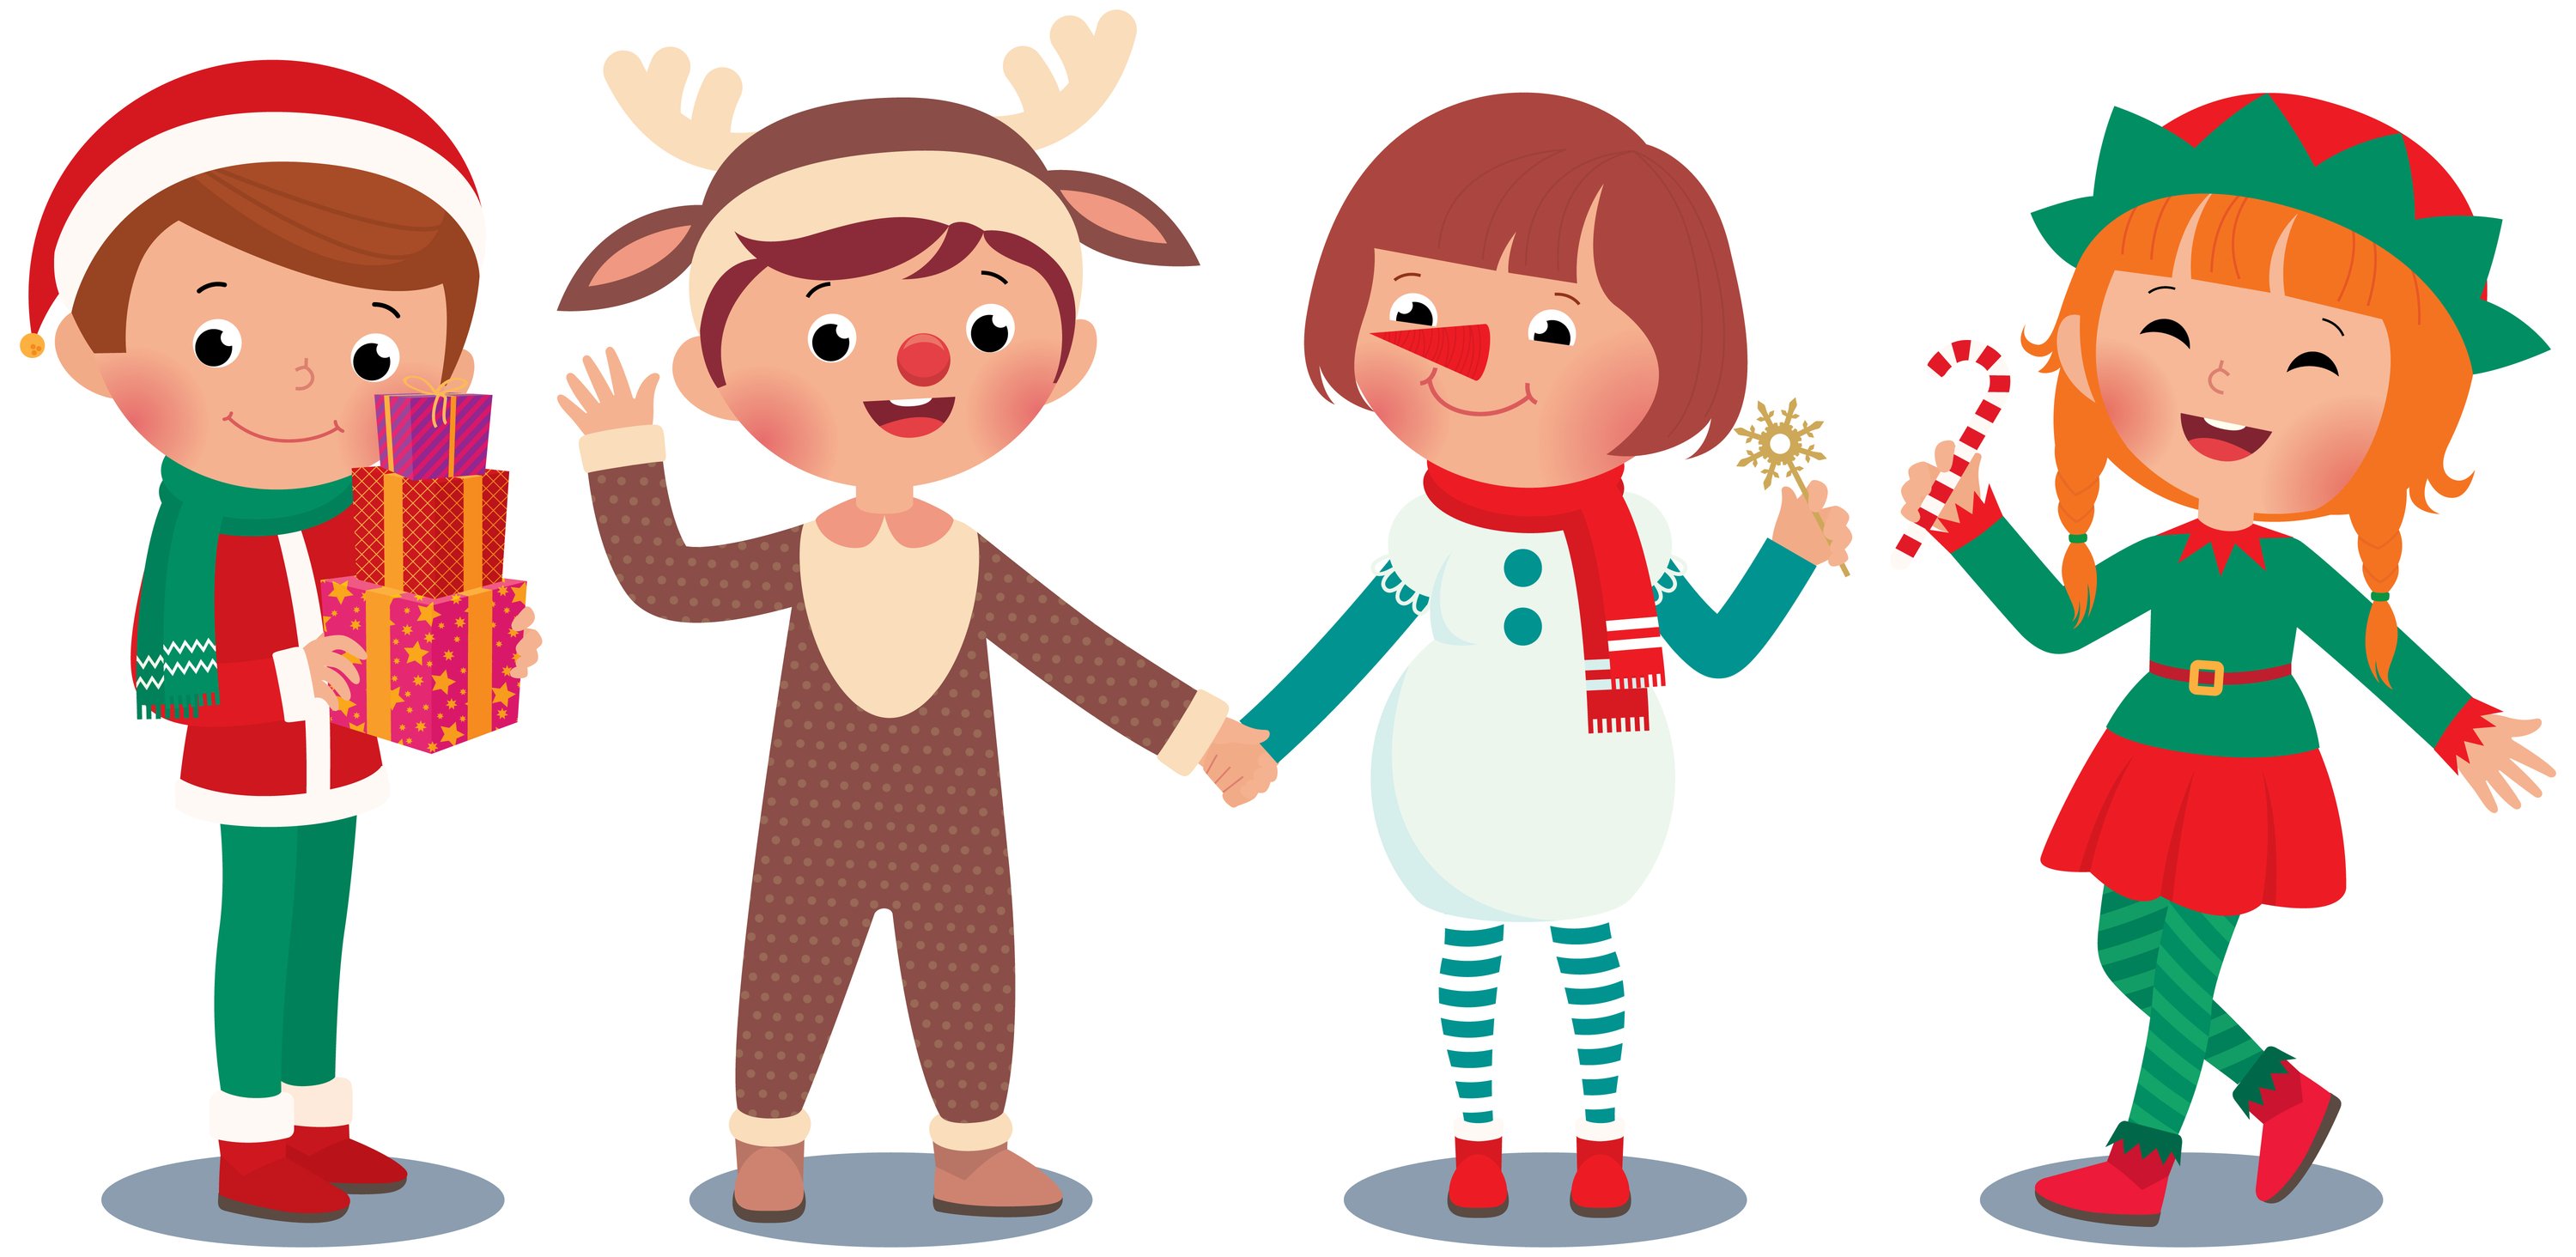 Children in Christmas costume characters celebrate Christmas